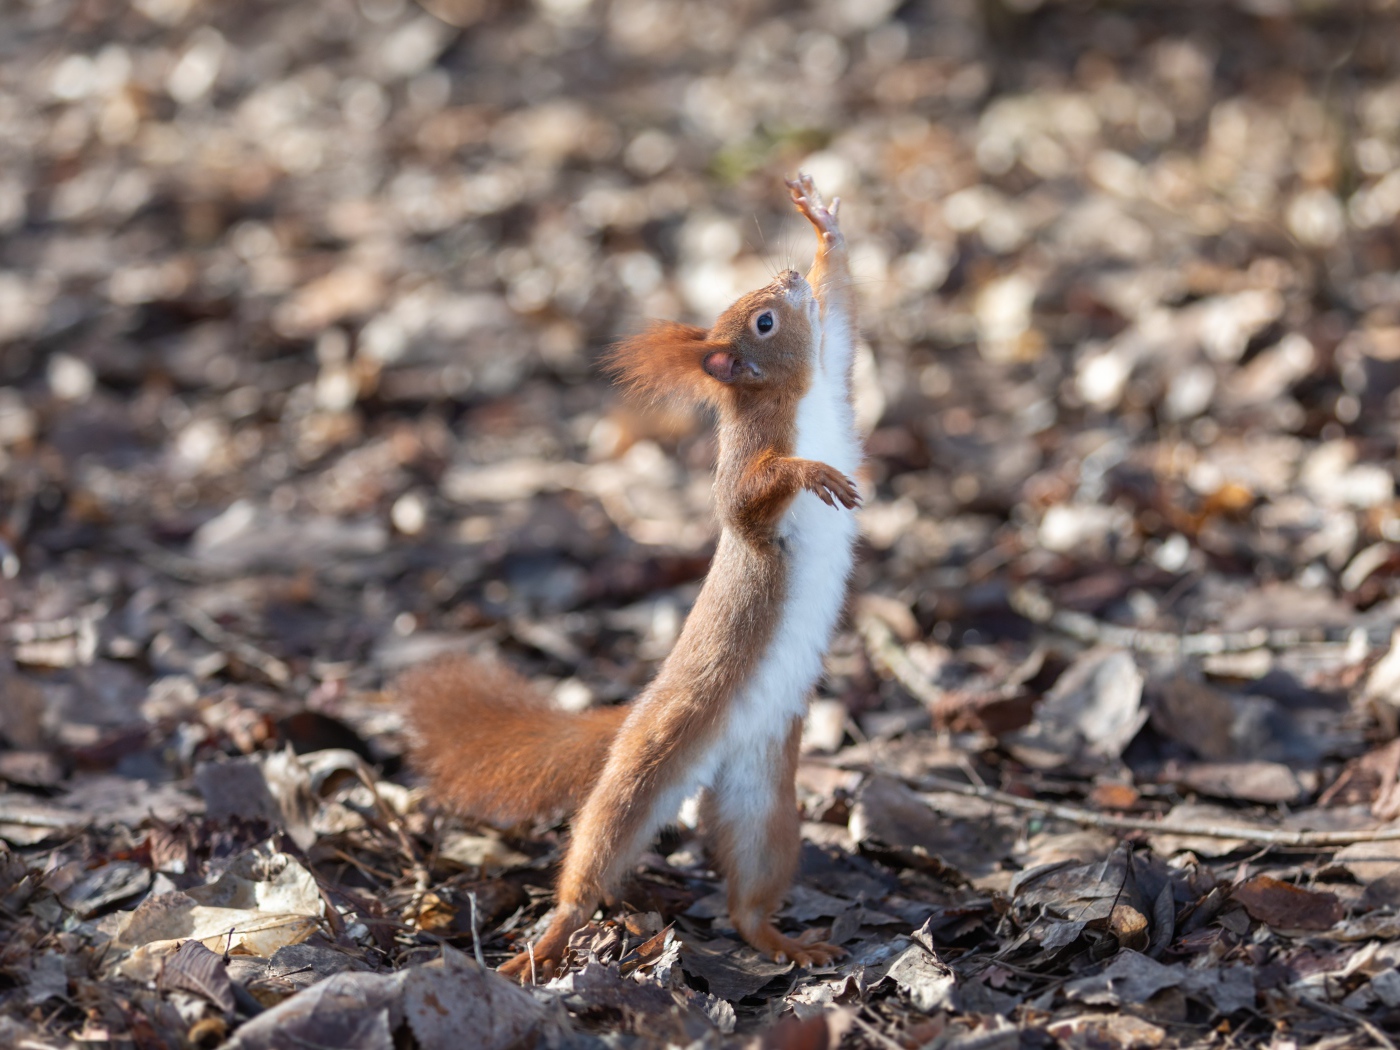 Red squirrel pulls its paw up